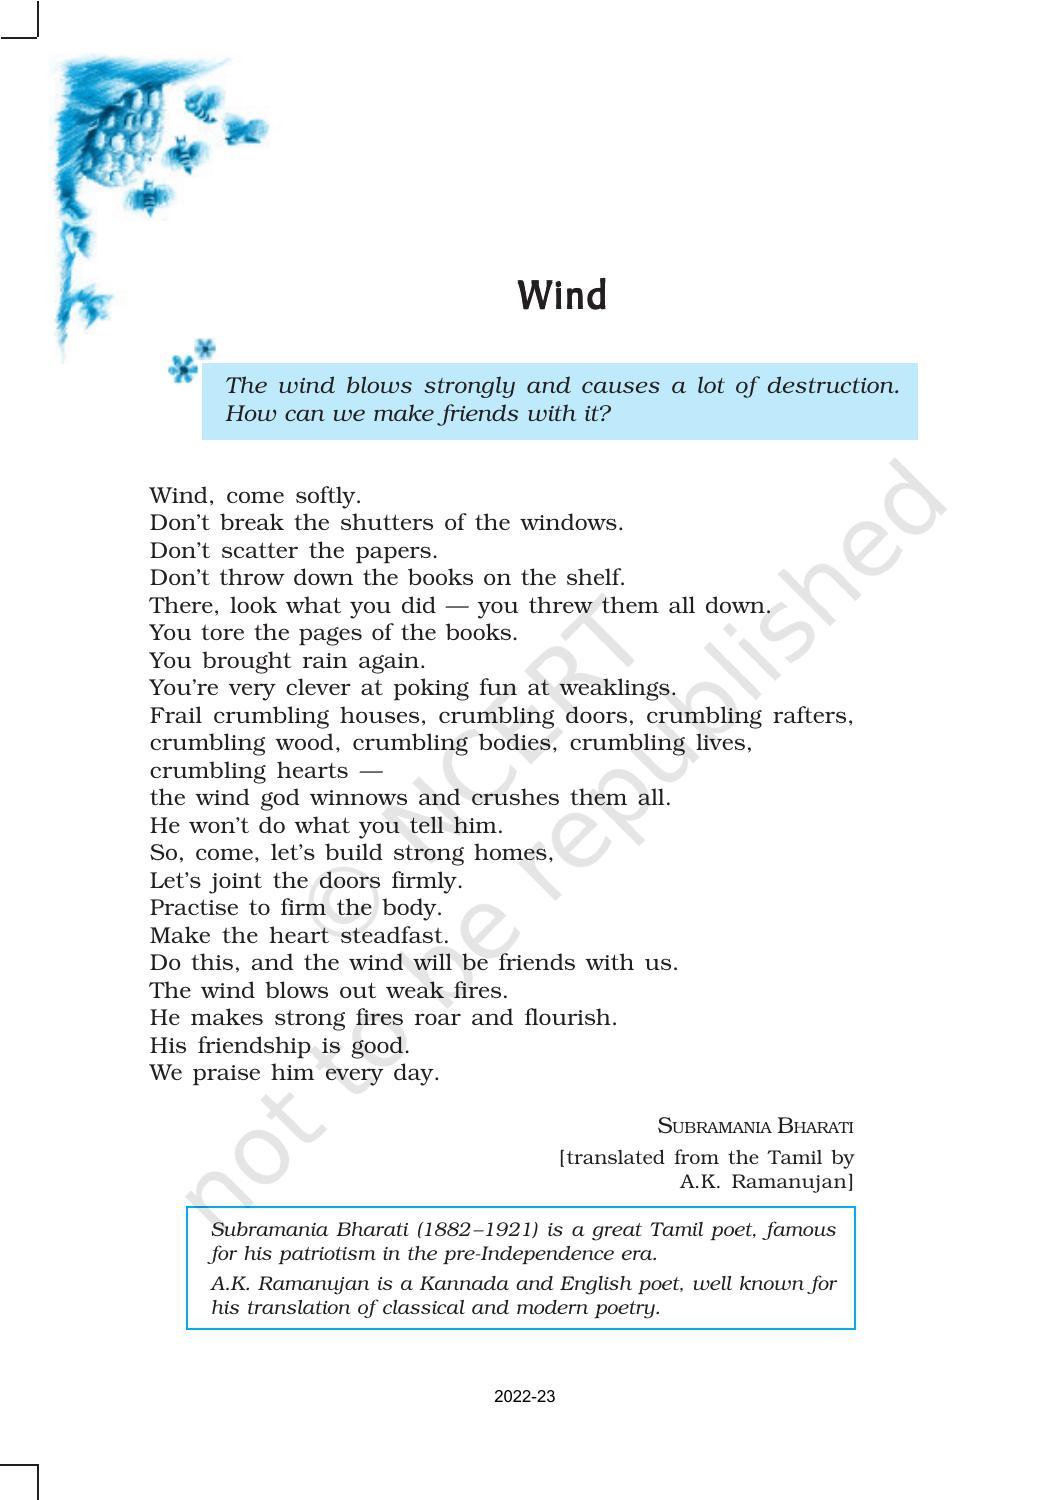 NCERT Book for Class 9 English Chapter 2 The Sound of Music - Page 14